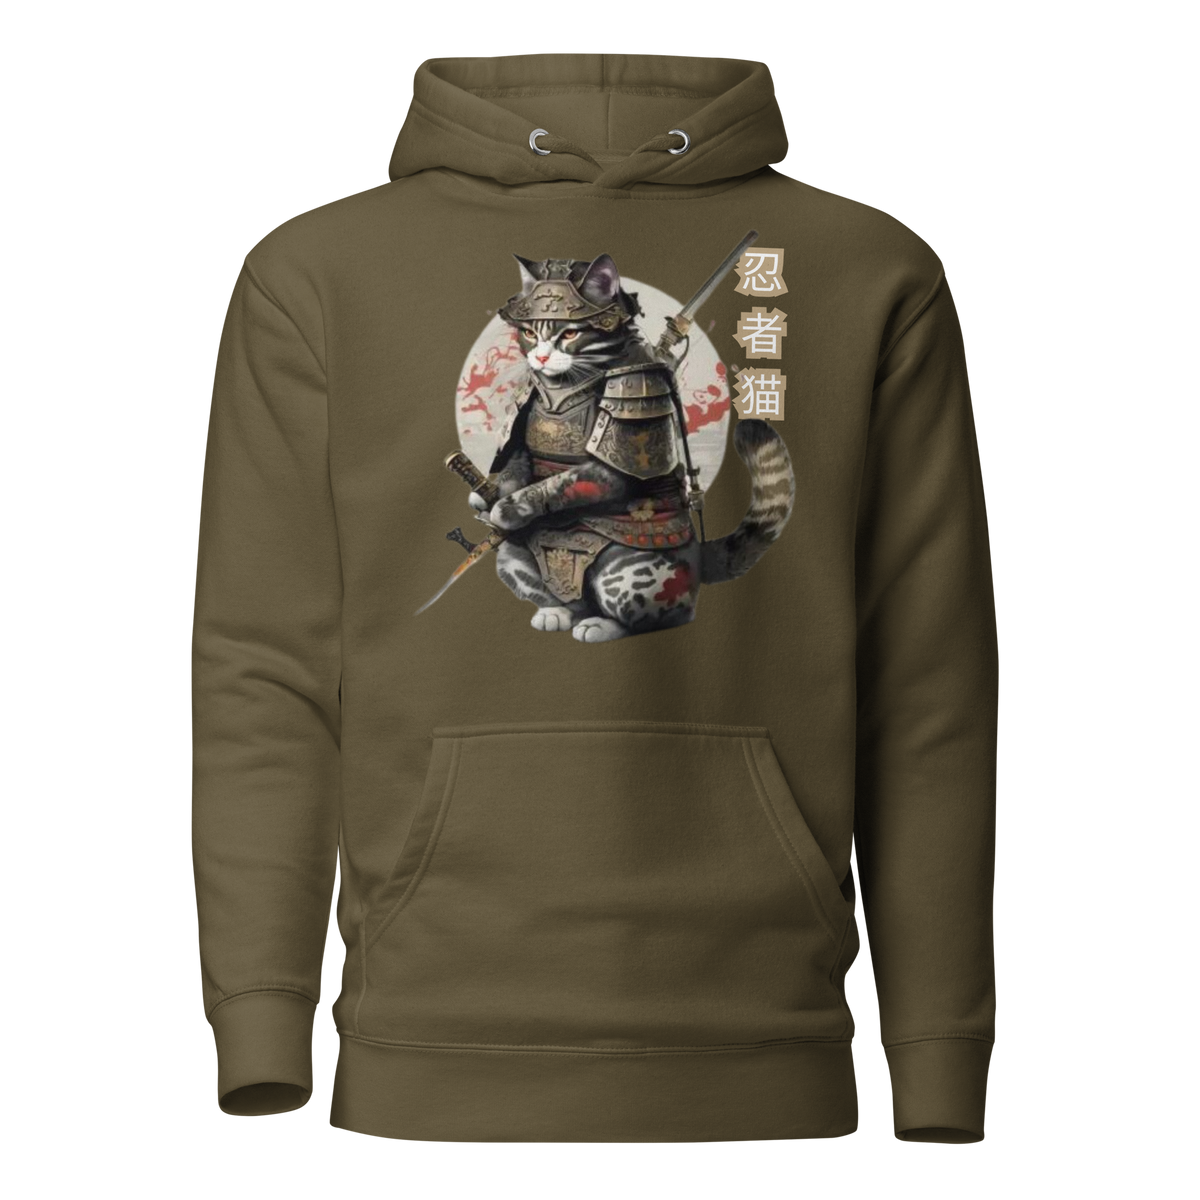 Military Green Color- Tokio Japan,  Samurai cat hoodie,  Samurai Cat, Tattoo Style hoodie,  Samurai cat,  Samurai,  Ninja, Samurai Kitten,  Ninja cat hoodie,  Ninja Cat,  kawaii,  Japanese Kawaii, Ninja Cat hoodie,  Japanese Calligraphy,  gift for him,  gift for her,  gift for cat lover,  Cat Lover hoodie